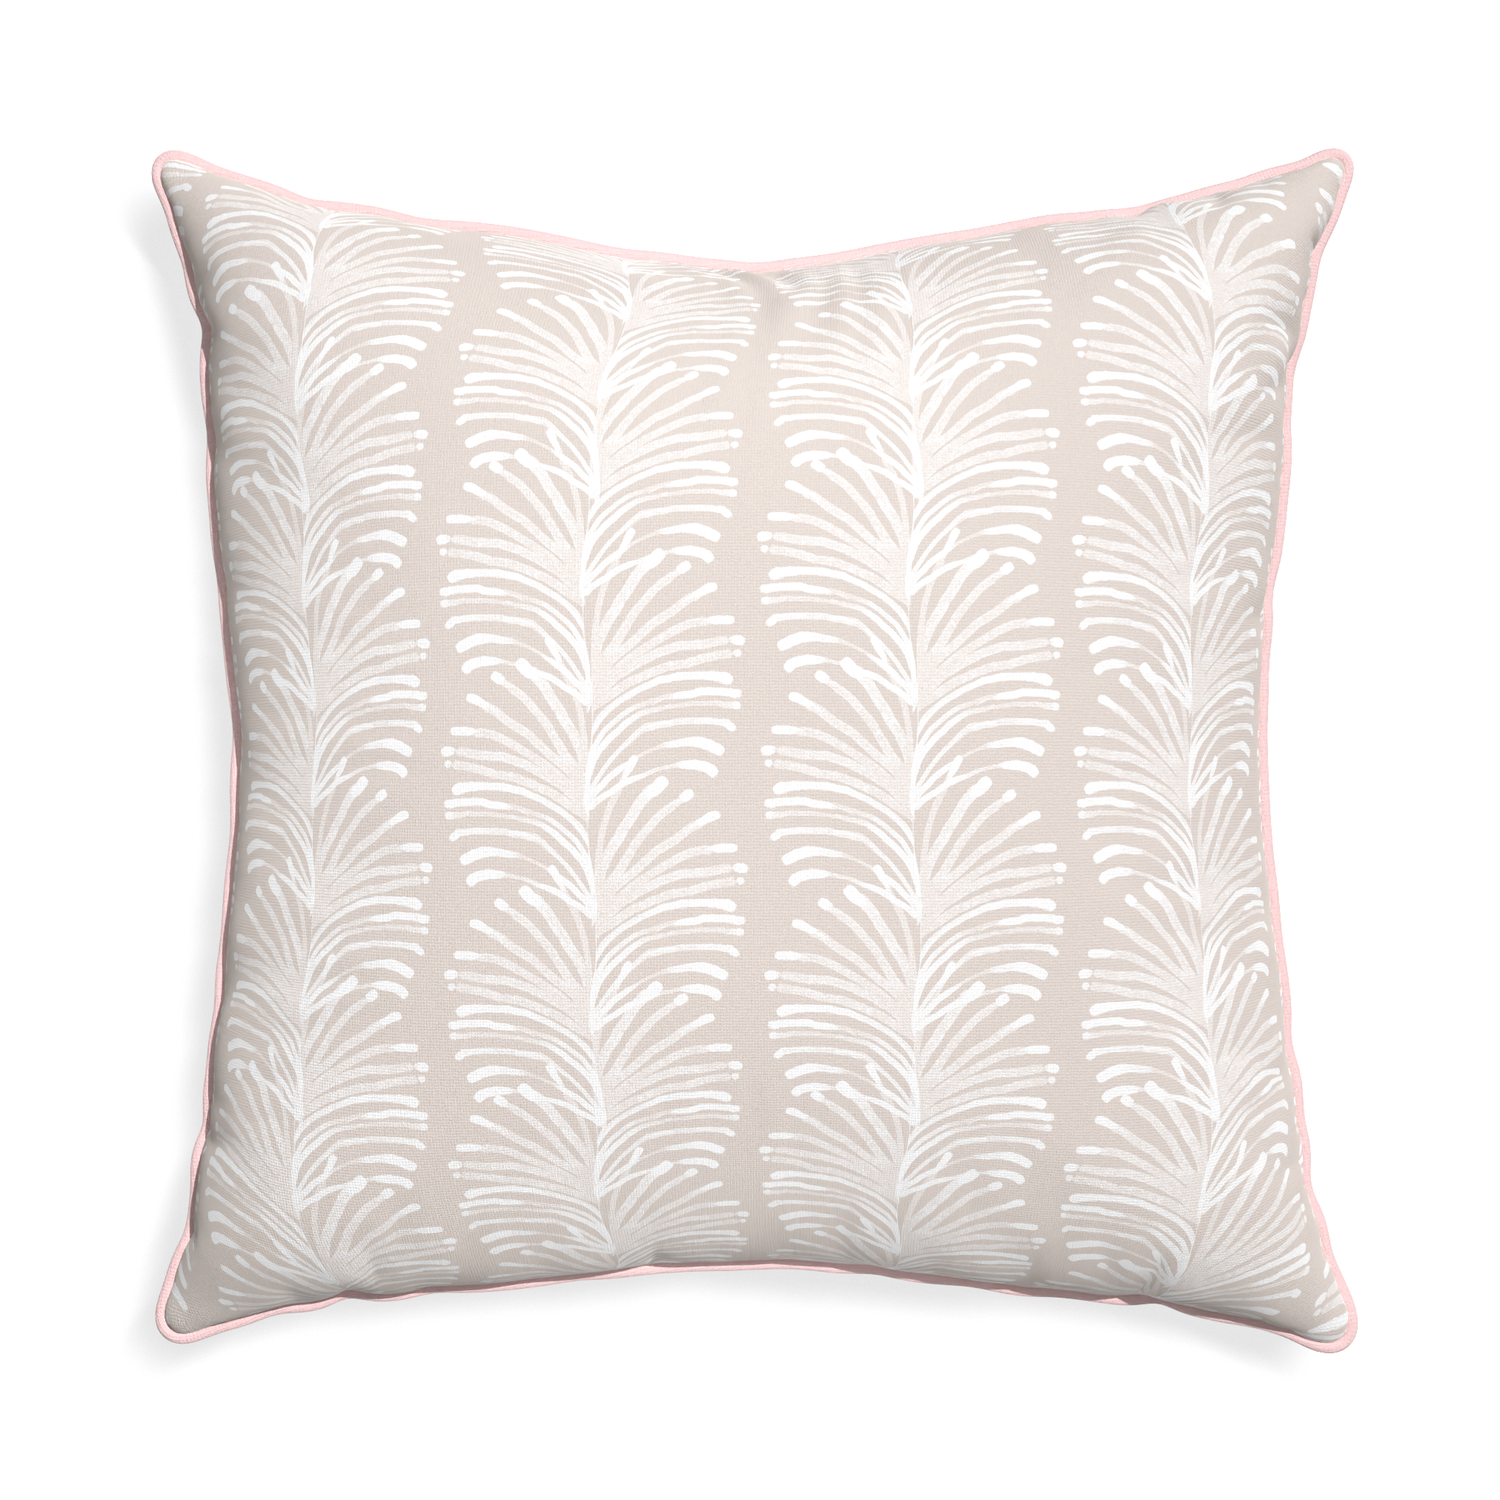 Euro-sham emma sand custom pillow with petal piping on white background